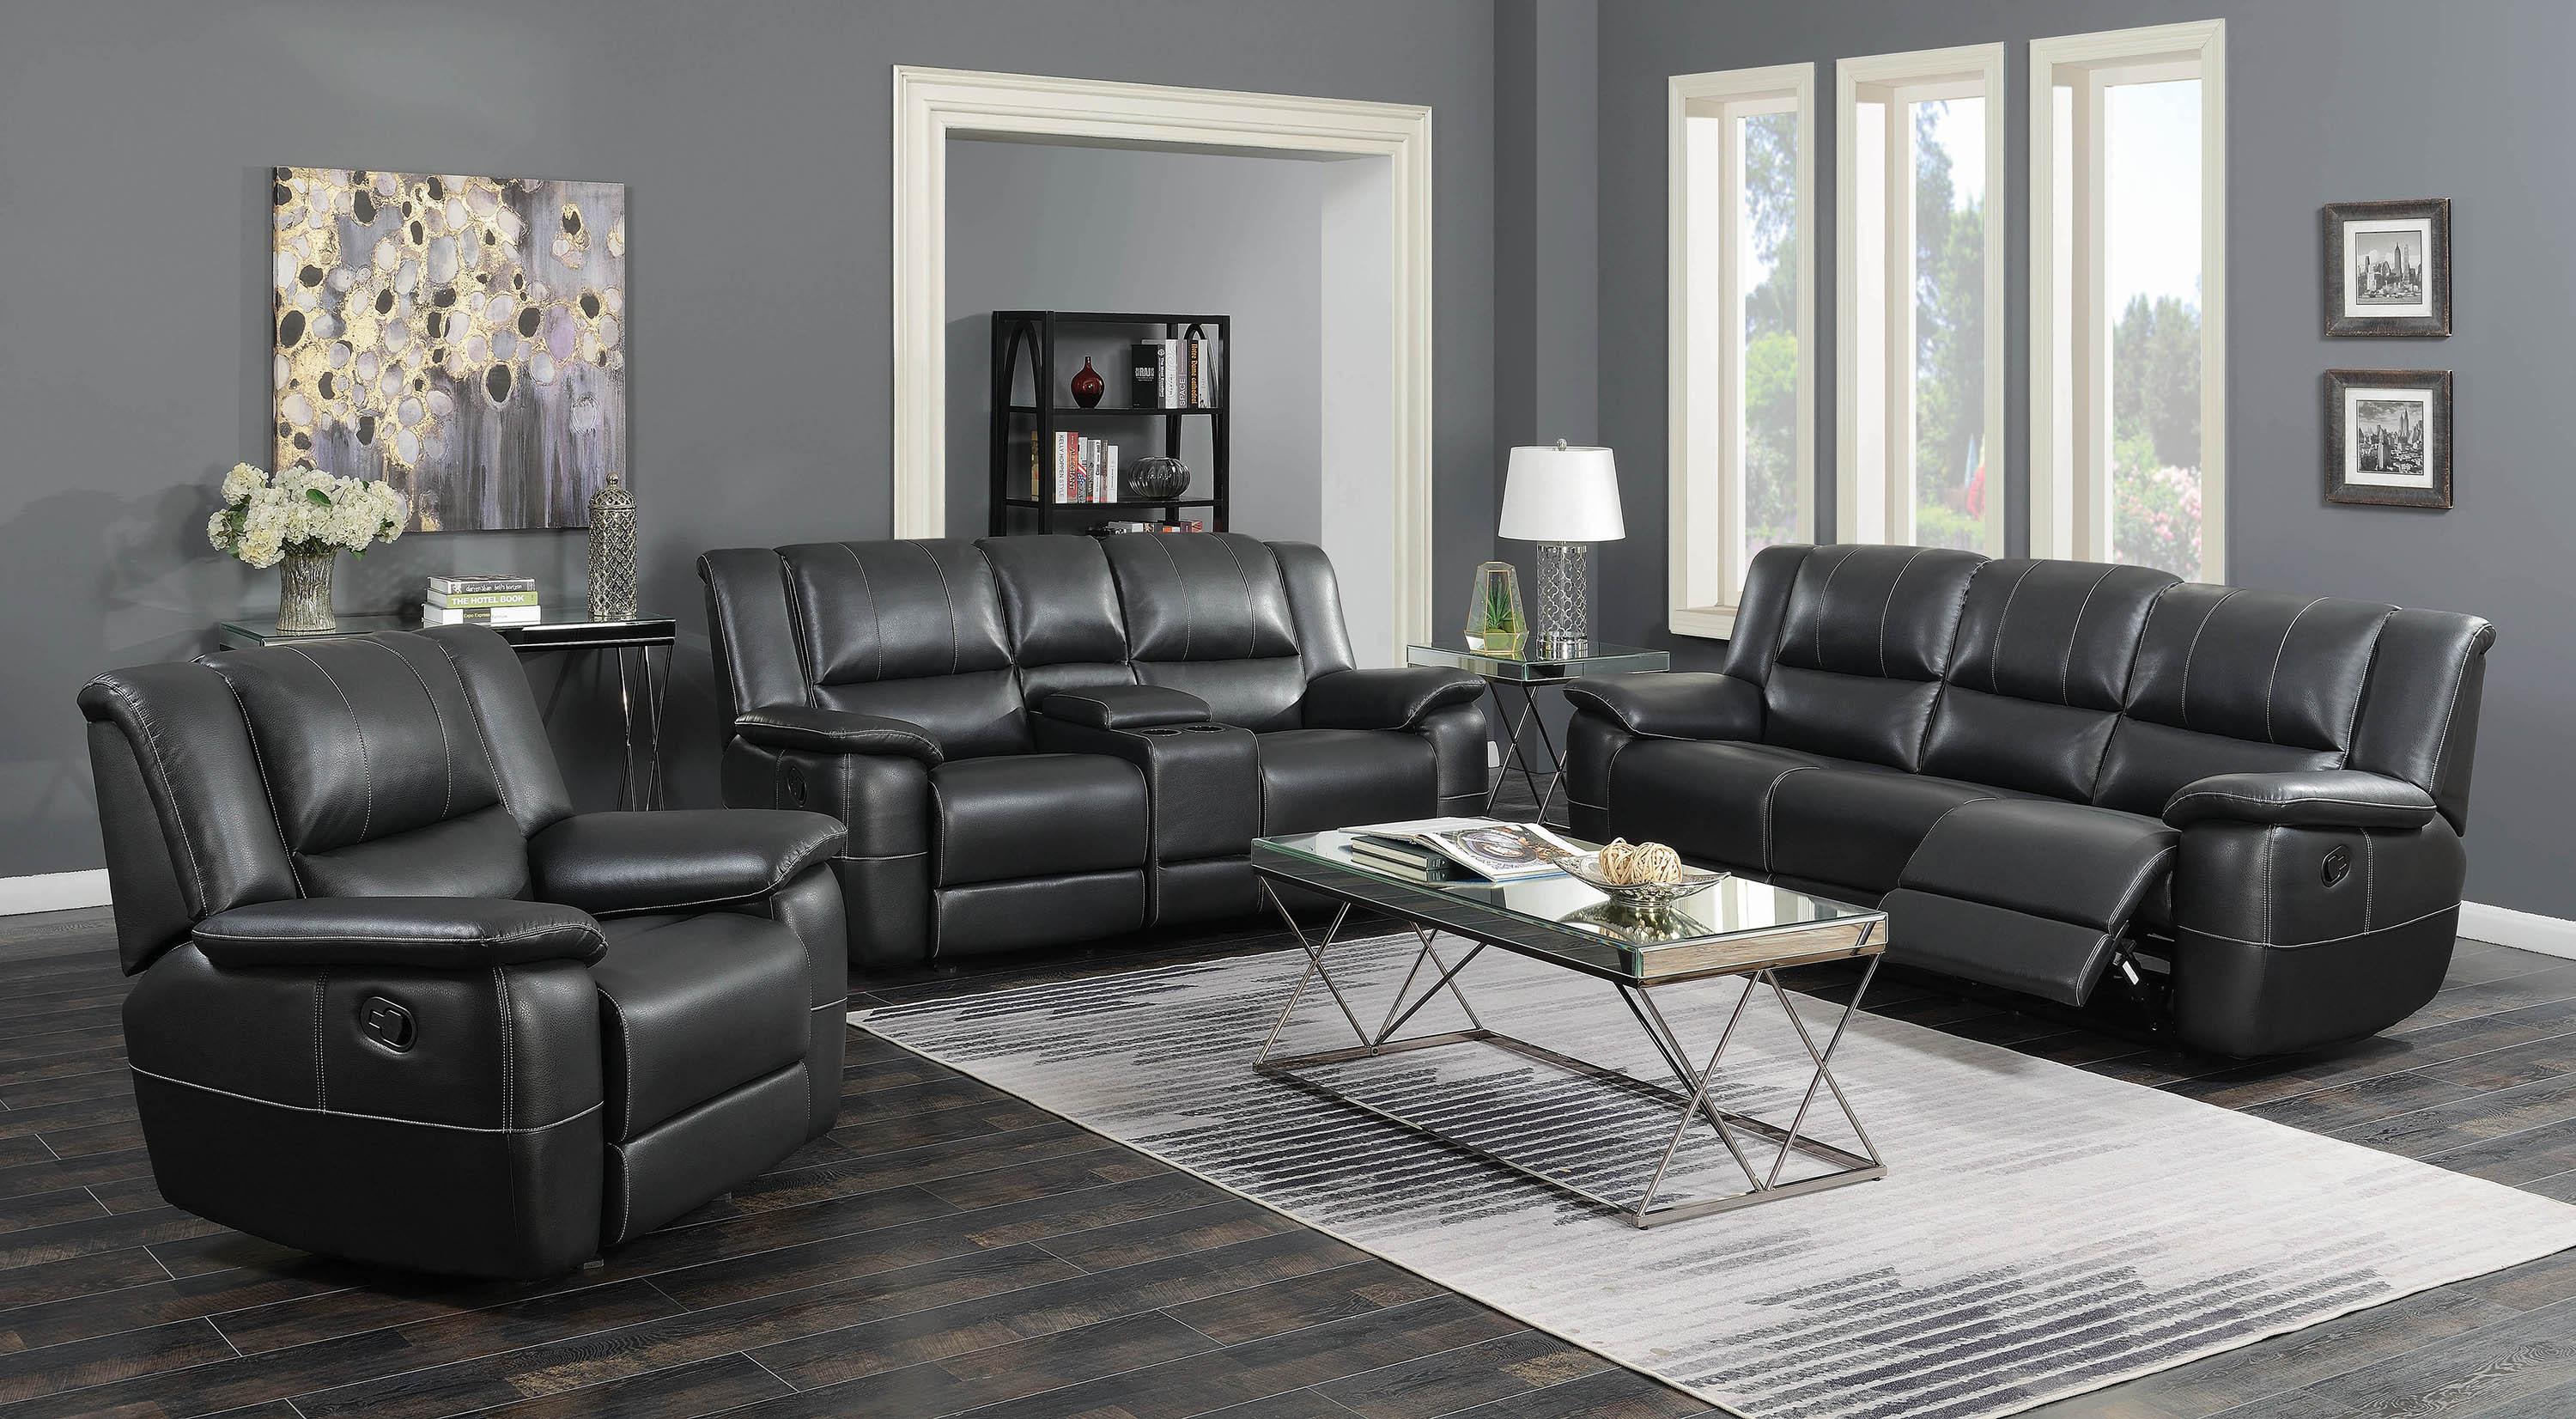 Contemporary Living Room Set 601061-S2 Lee 601061-S2 in Black Polyurethane